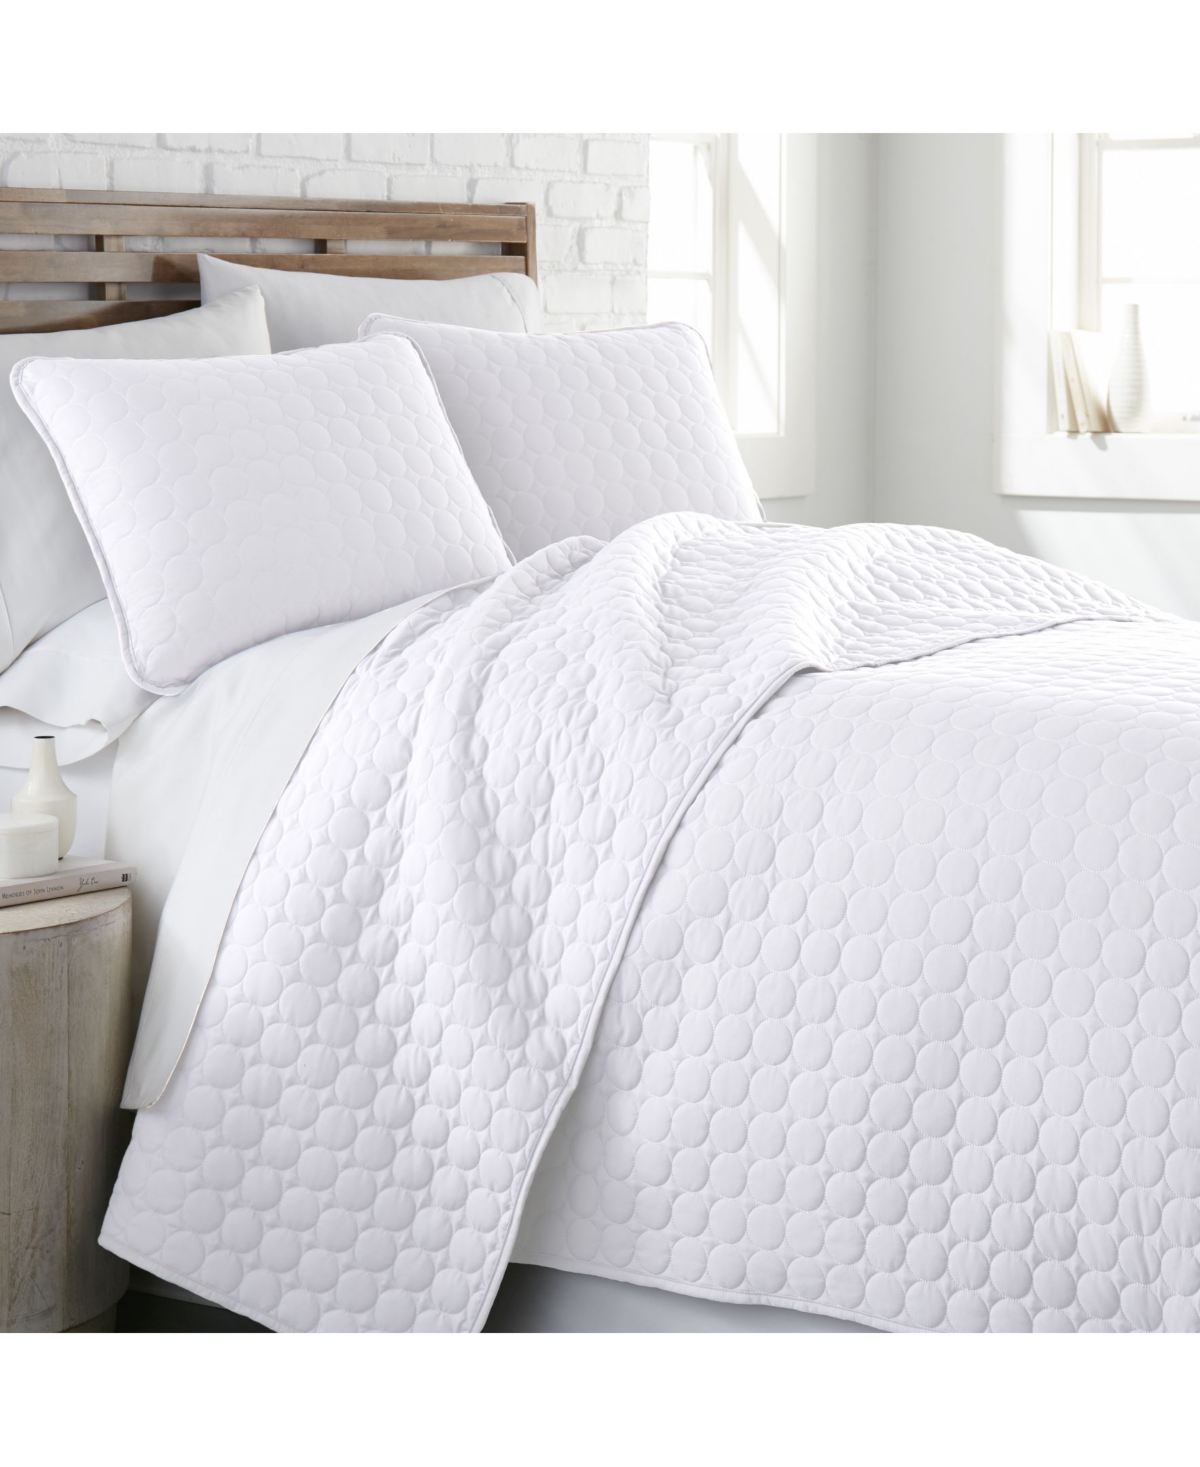 Southshore Fine Linens Ultra-soft Lightweight 3-piece Quilt And Sham Set, Twin/twin Xl In White